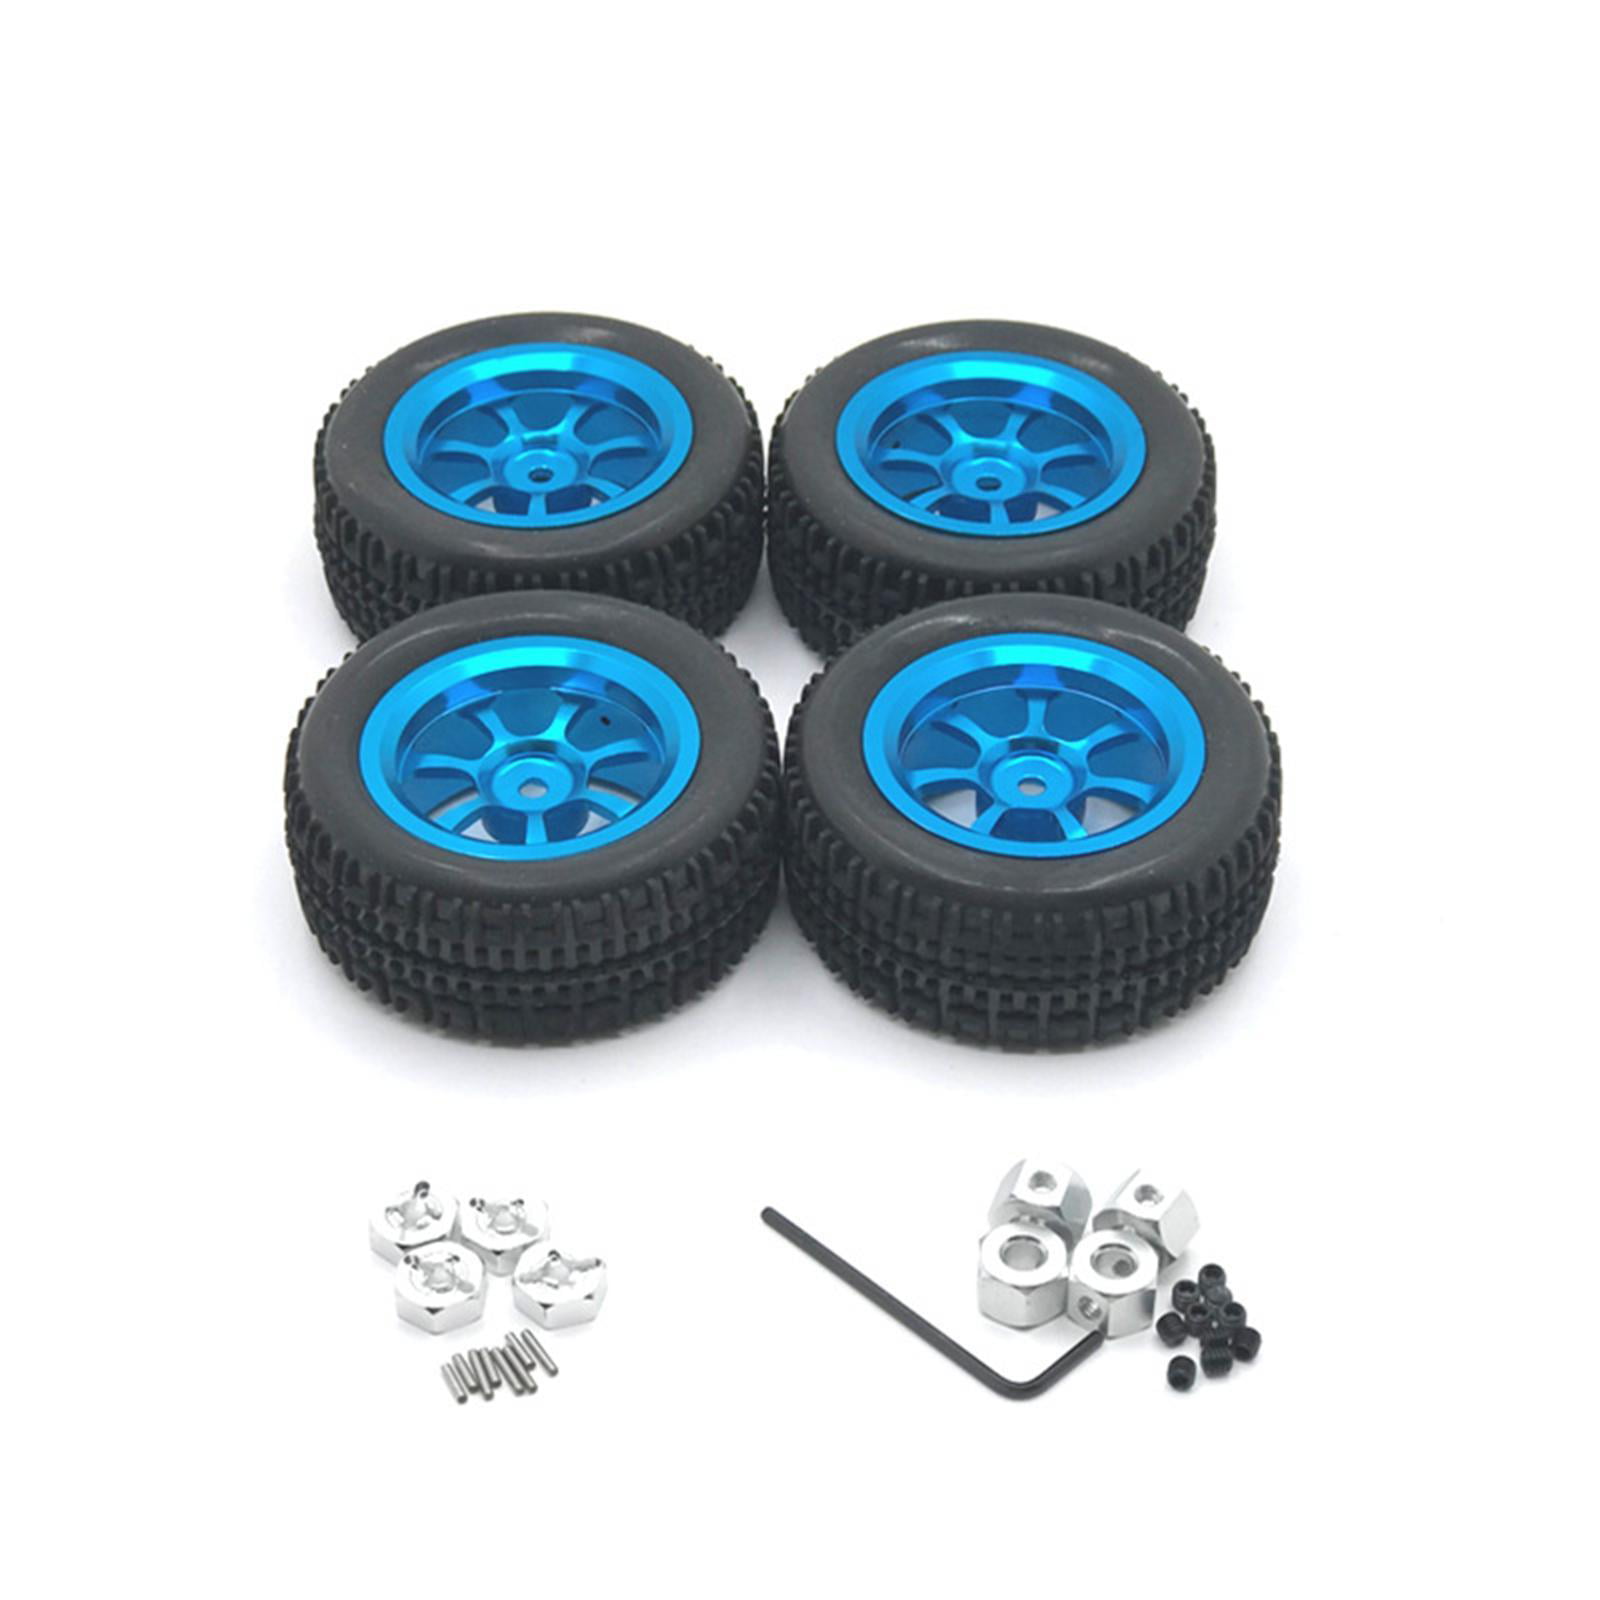 7 Holes 4Pcs Tires Y-Shaped Tyre Pattern Rubber with Hubs for 1/10 Scale RC Truck Car